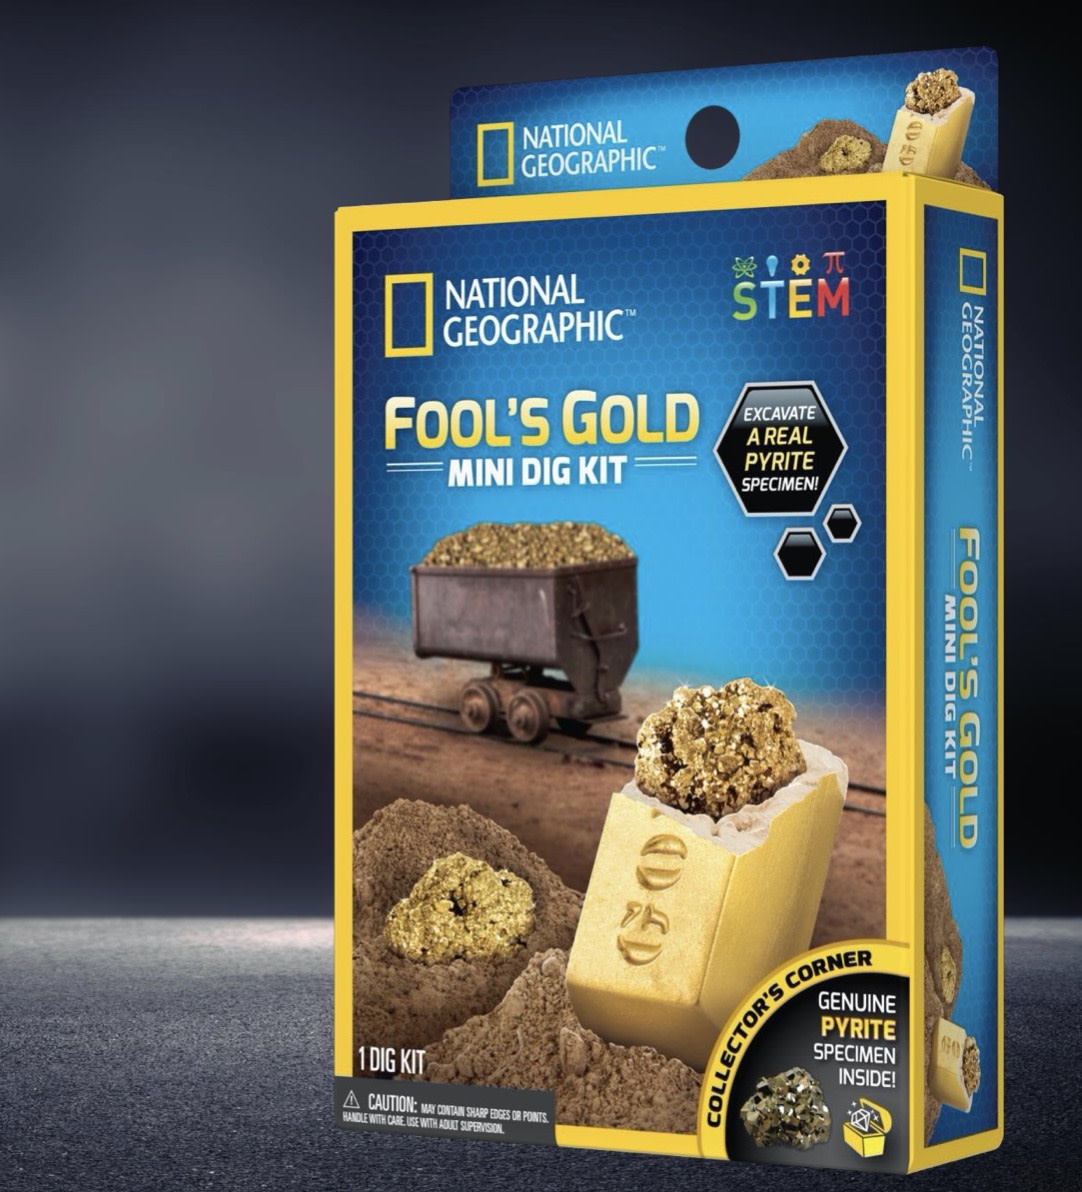 Fool's Gold Dig Kits – National Geographic